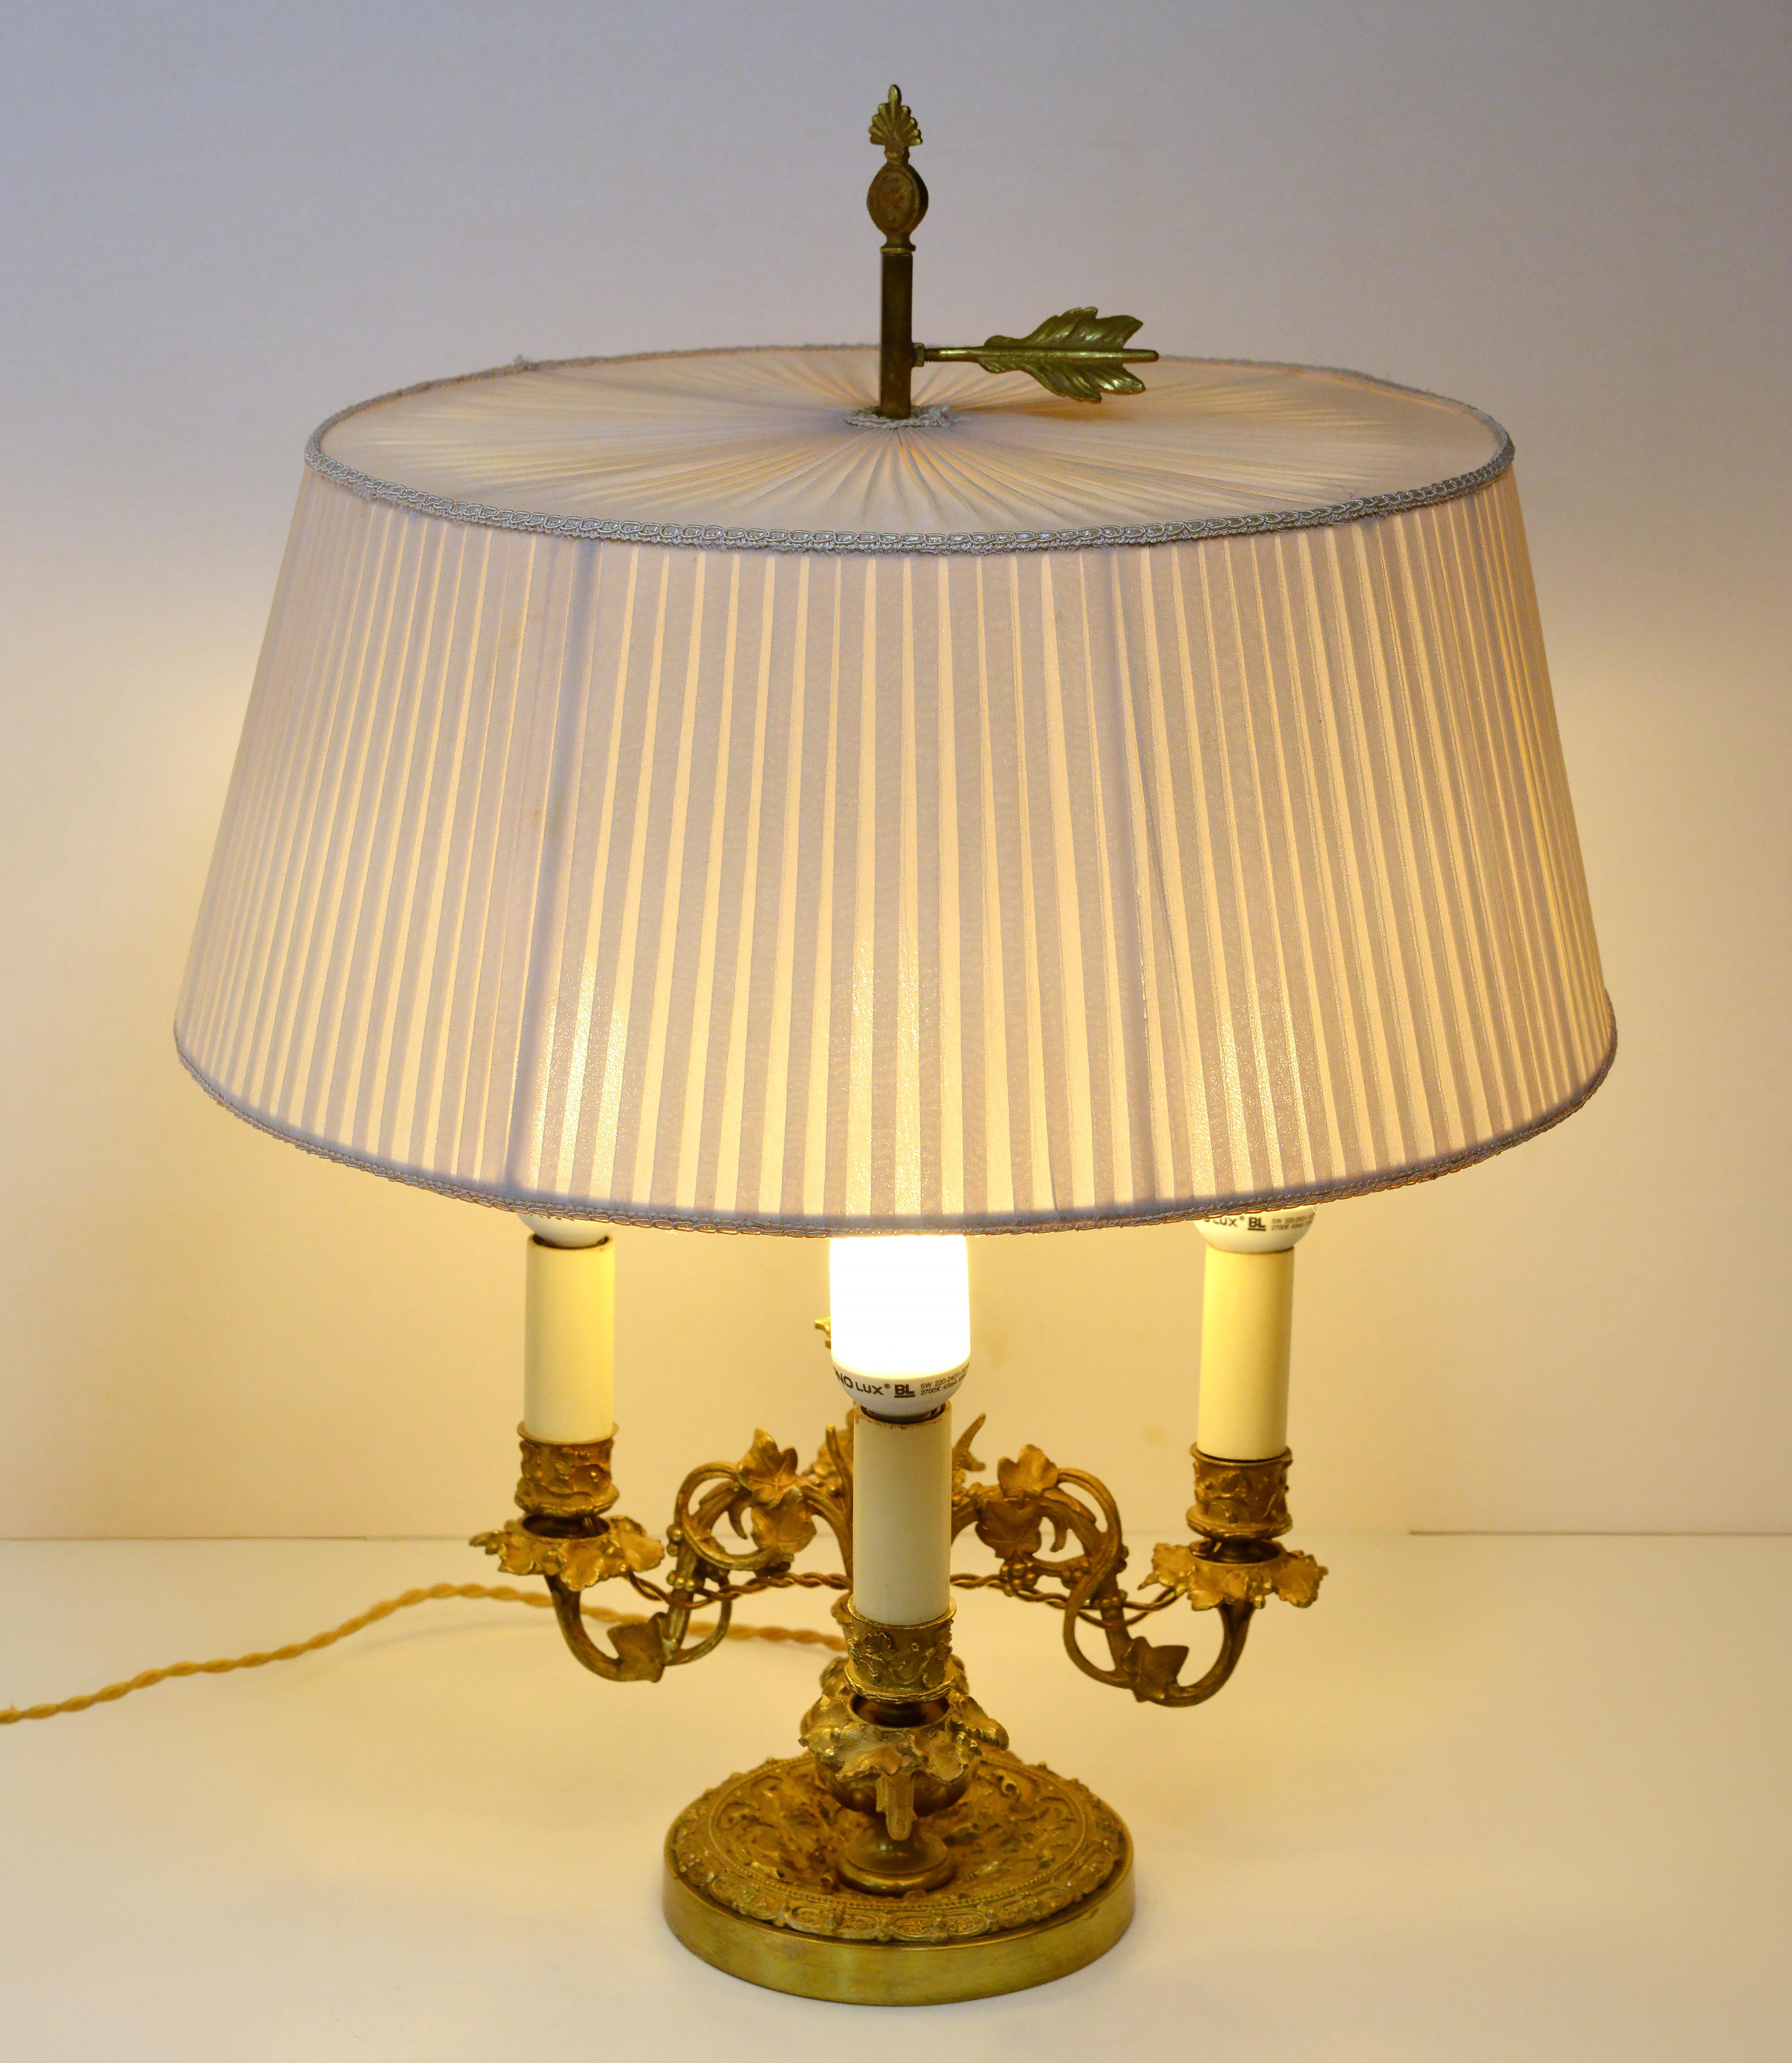 Stylish antique Bouillotte lamp. Square foot with a four candleholders in flora motive candleholders and adjustable fabric shade  with fixation bolt in form of an arrow feather. The lampshade was most likely replaced when the lamp was electrified to